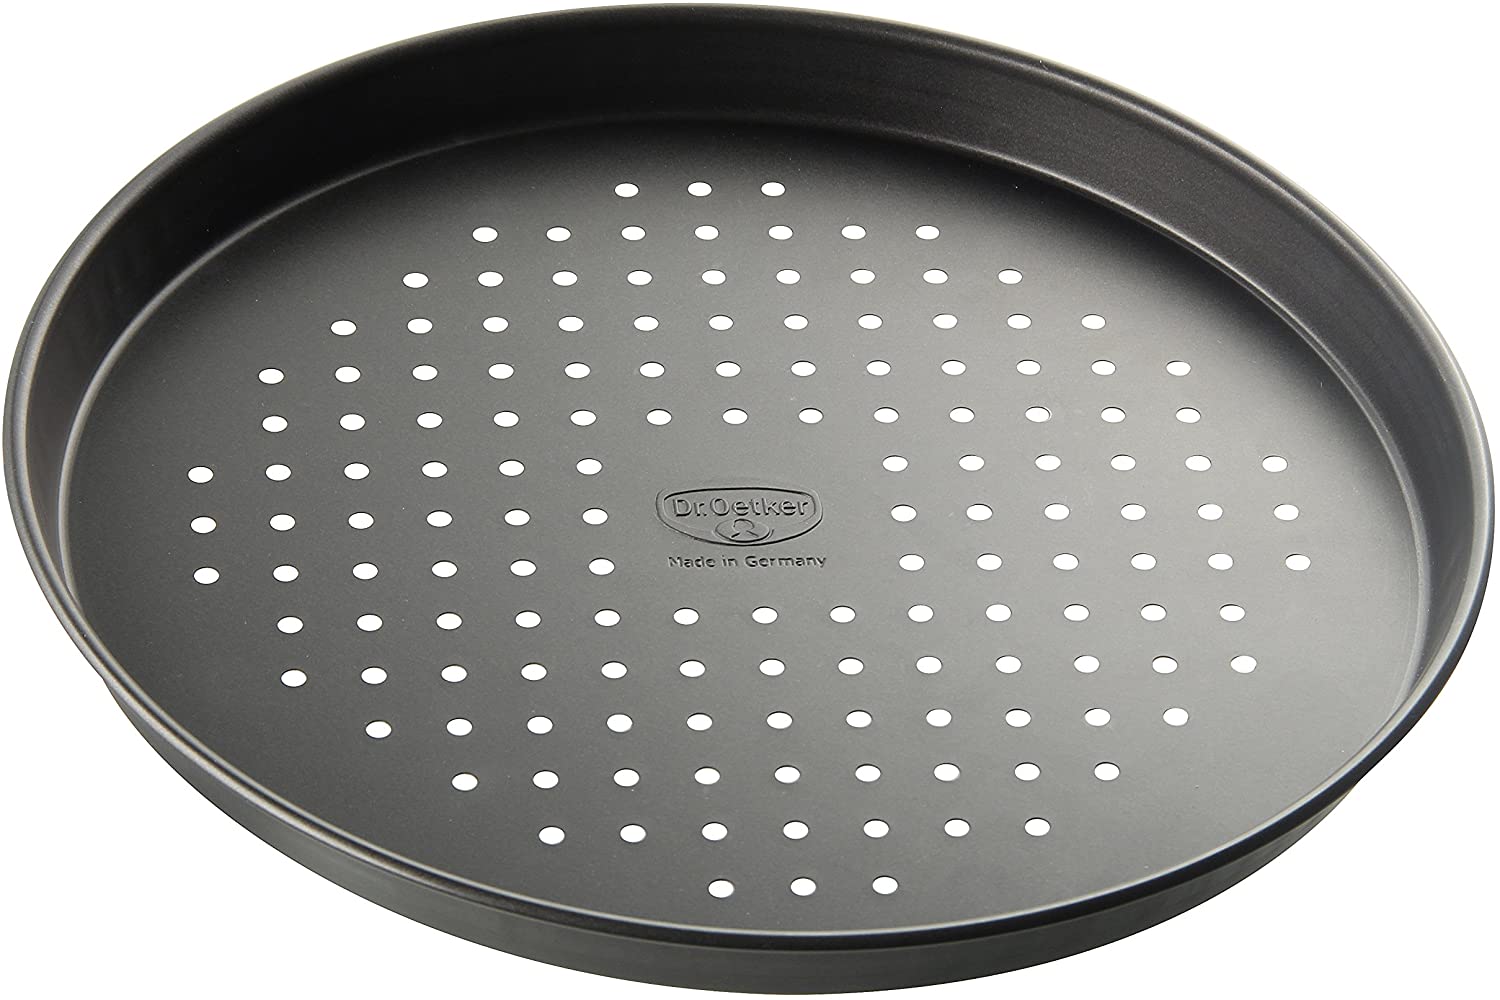 Dr. Oetker Tradition 28 cm Non-Stick Bakeware Perforated Pizza Tin, Black